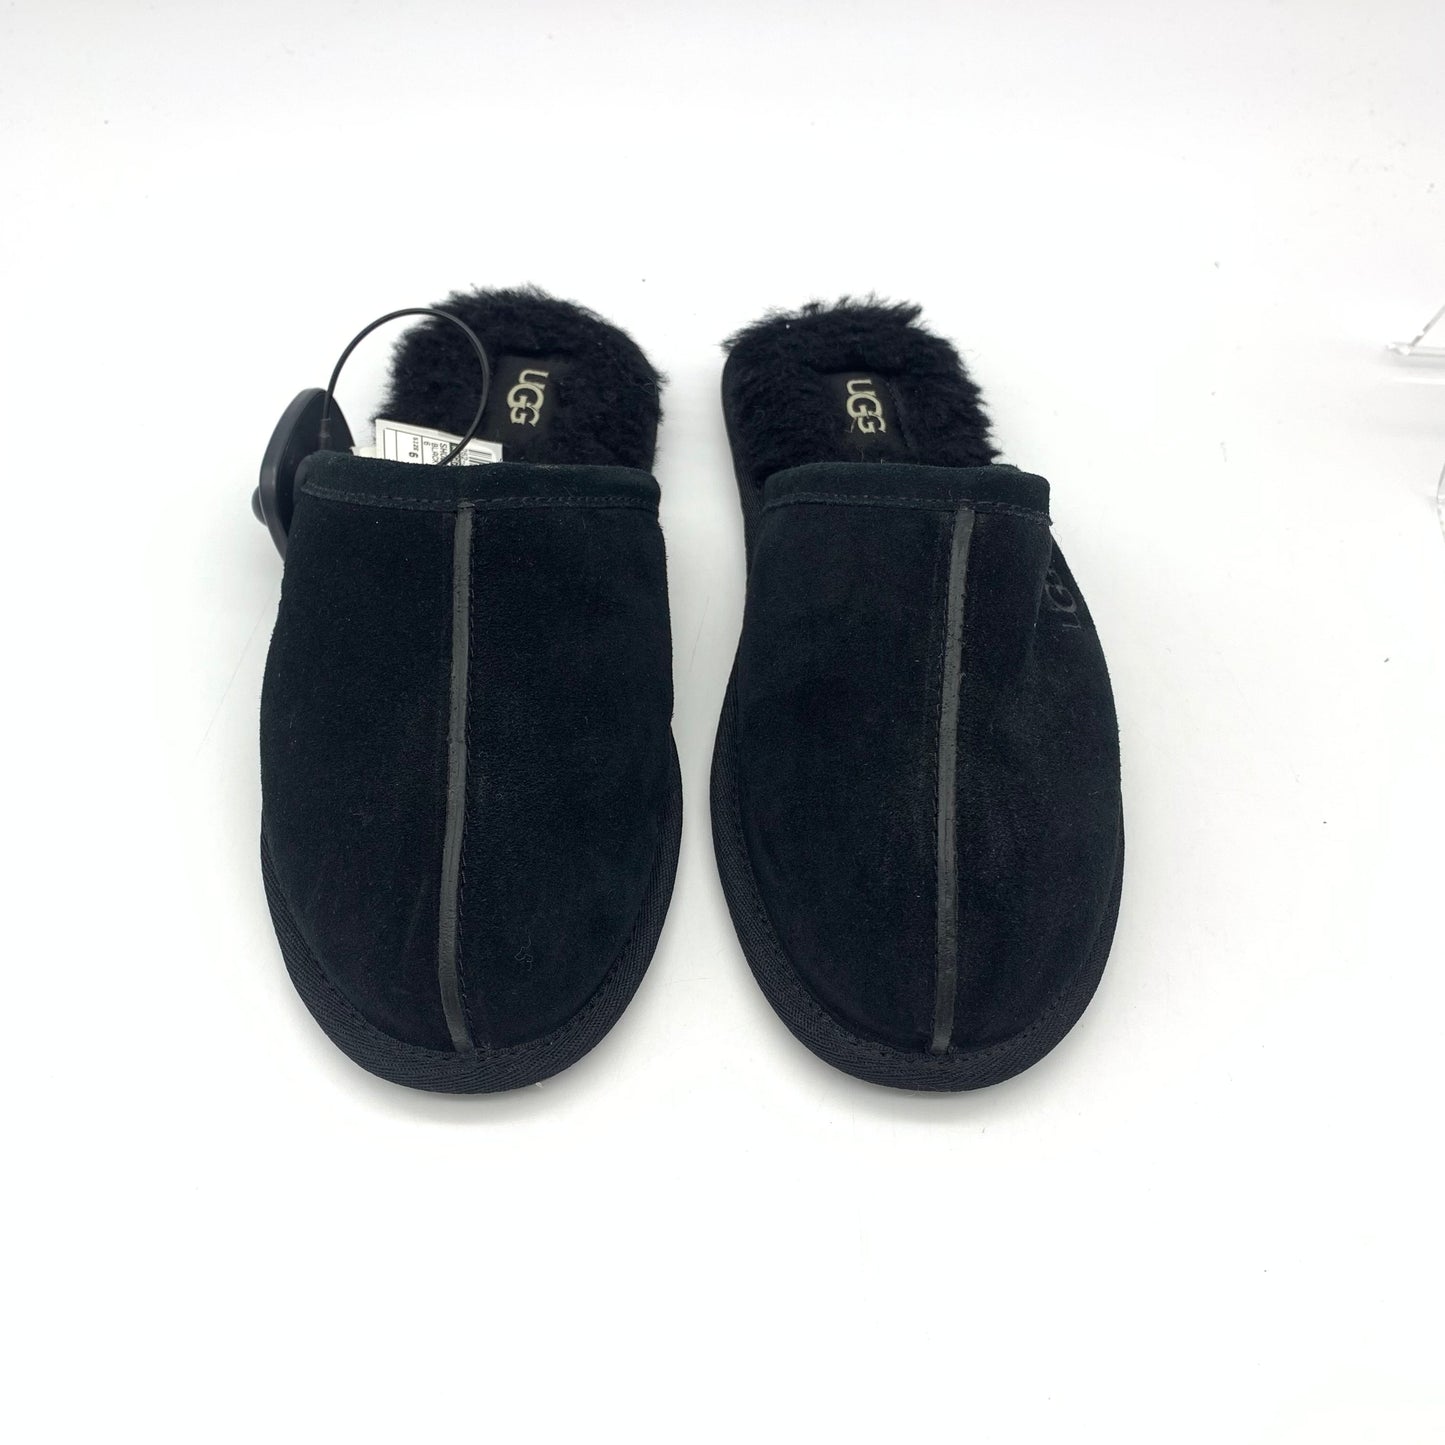 Shoes Flats Mule & Slide By Ugg  Size: 6